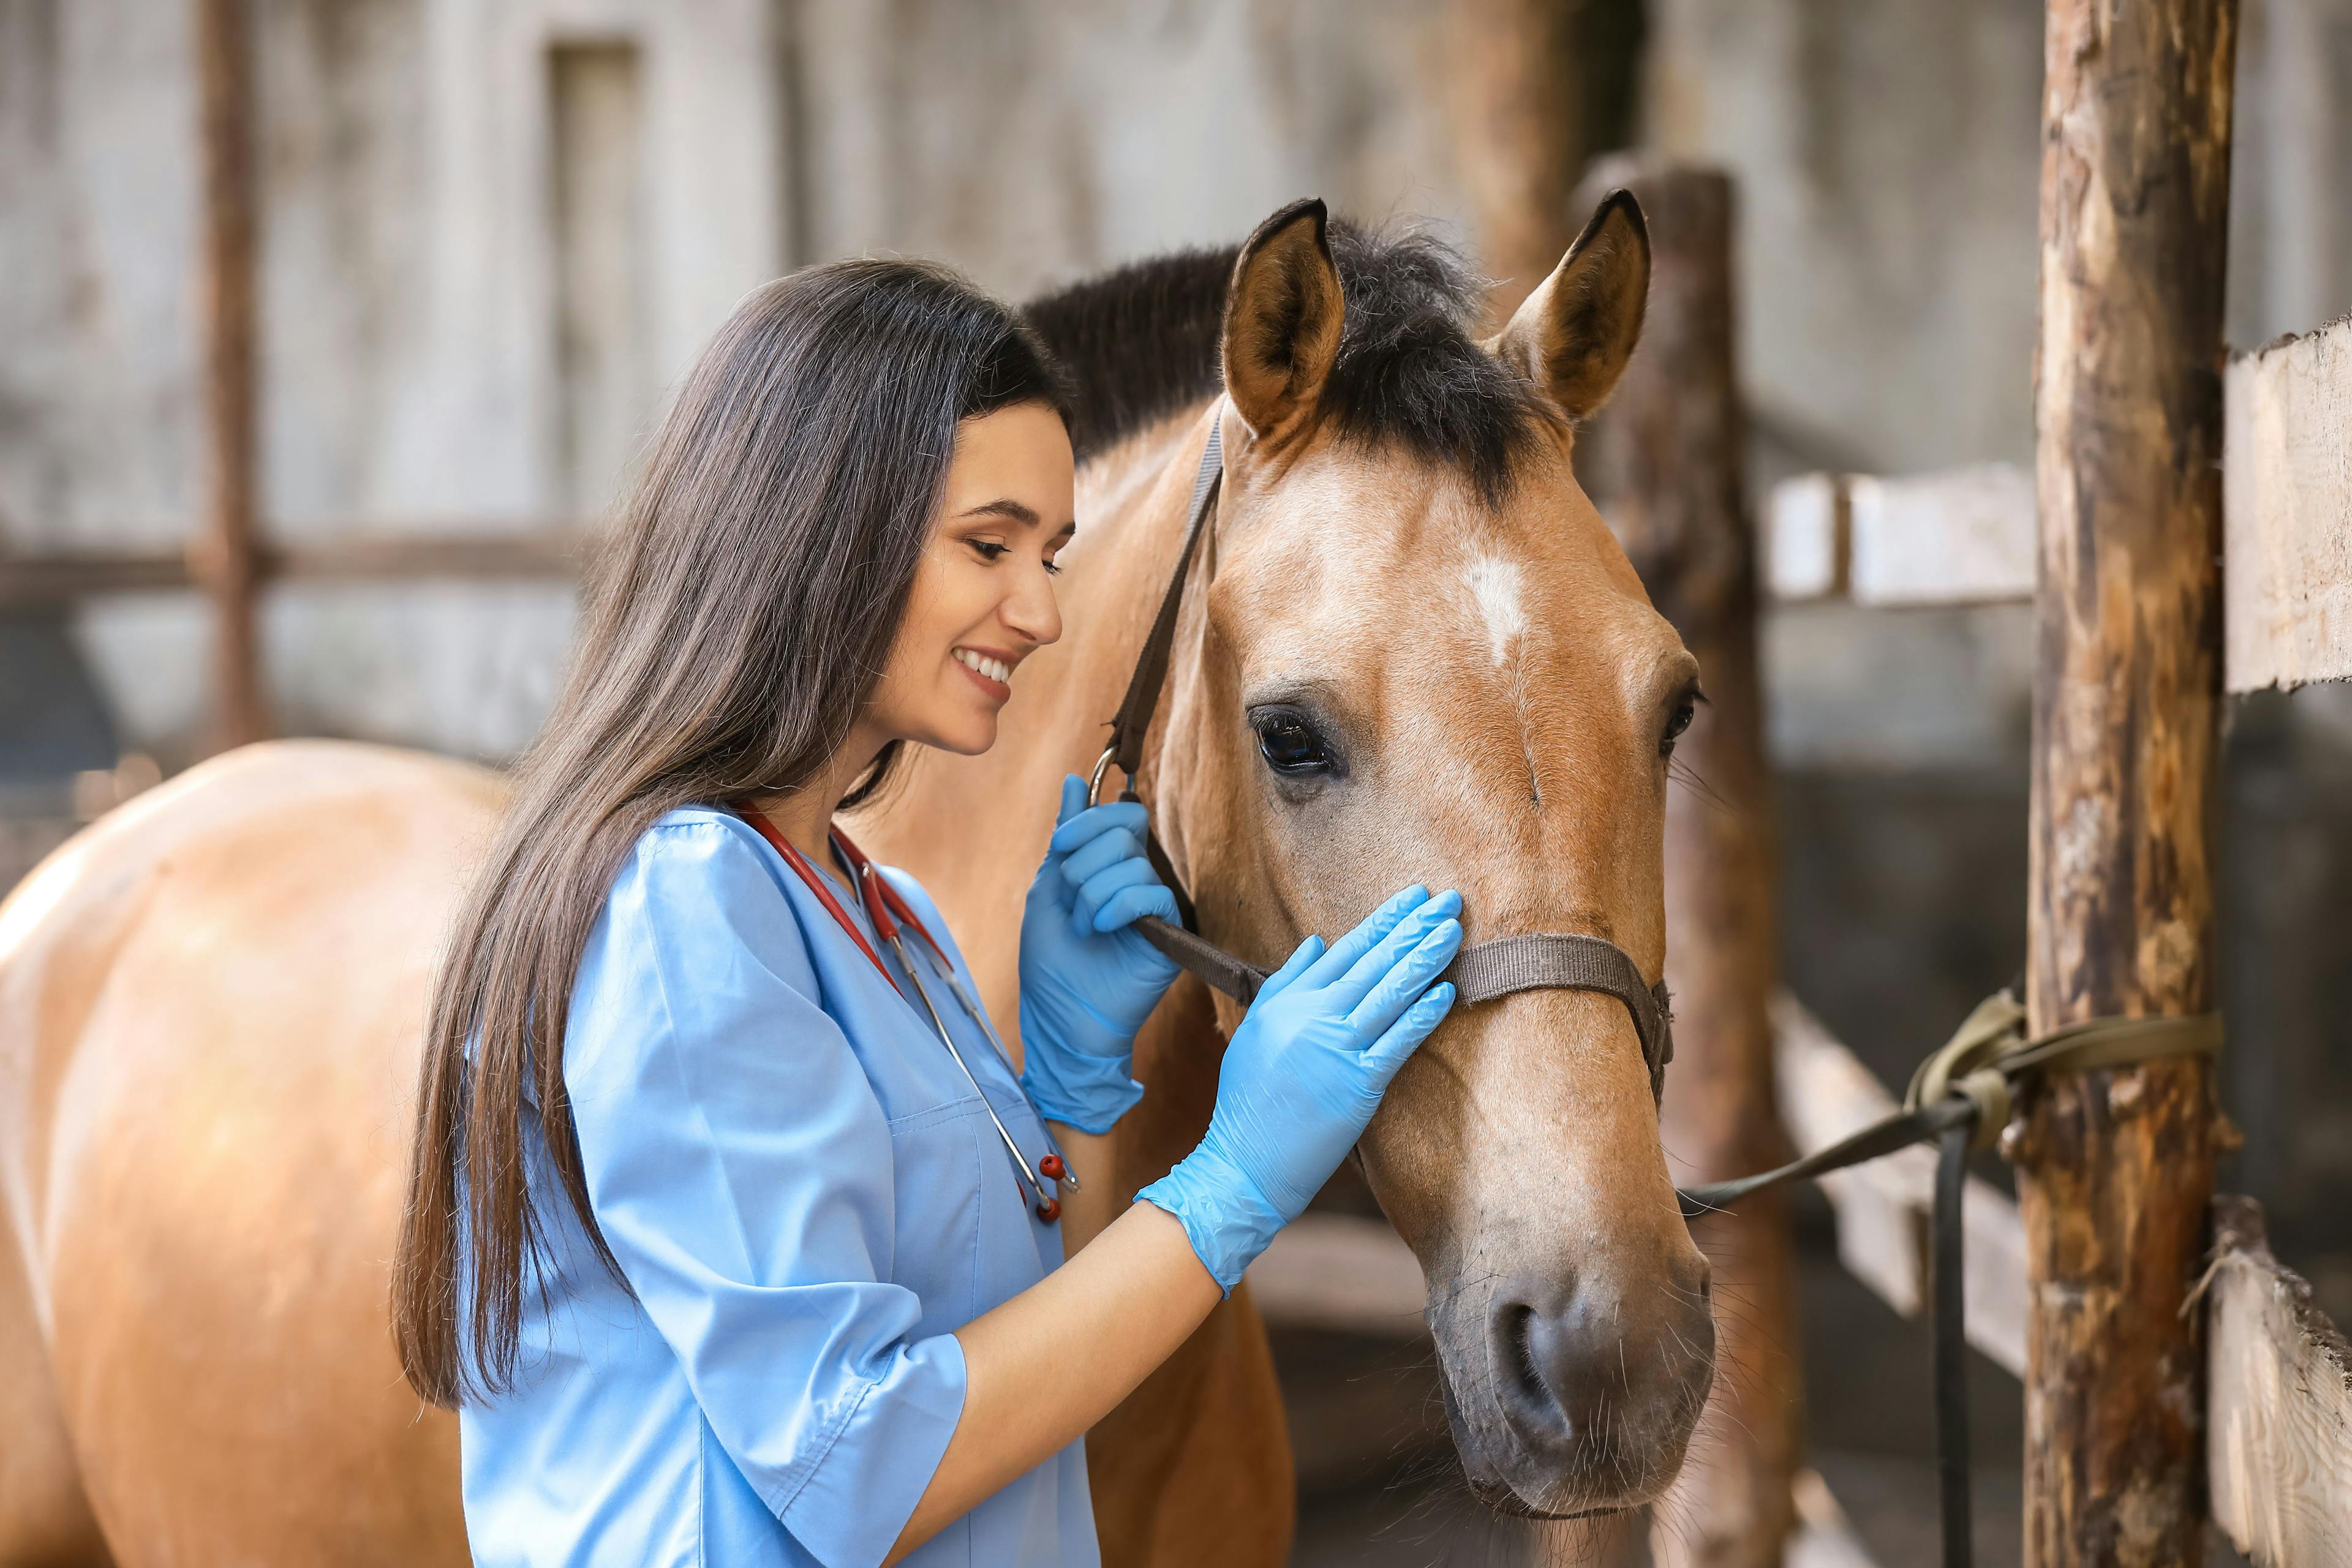 3 Must-reads for World Horse Day